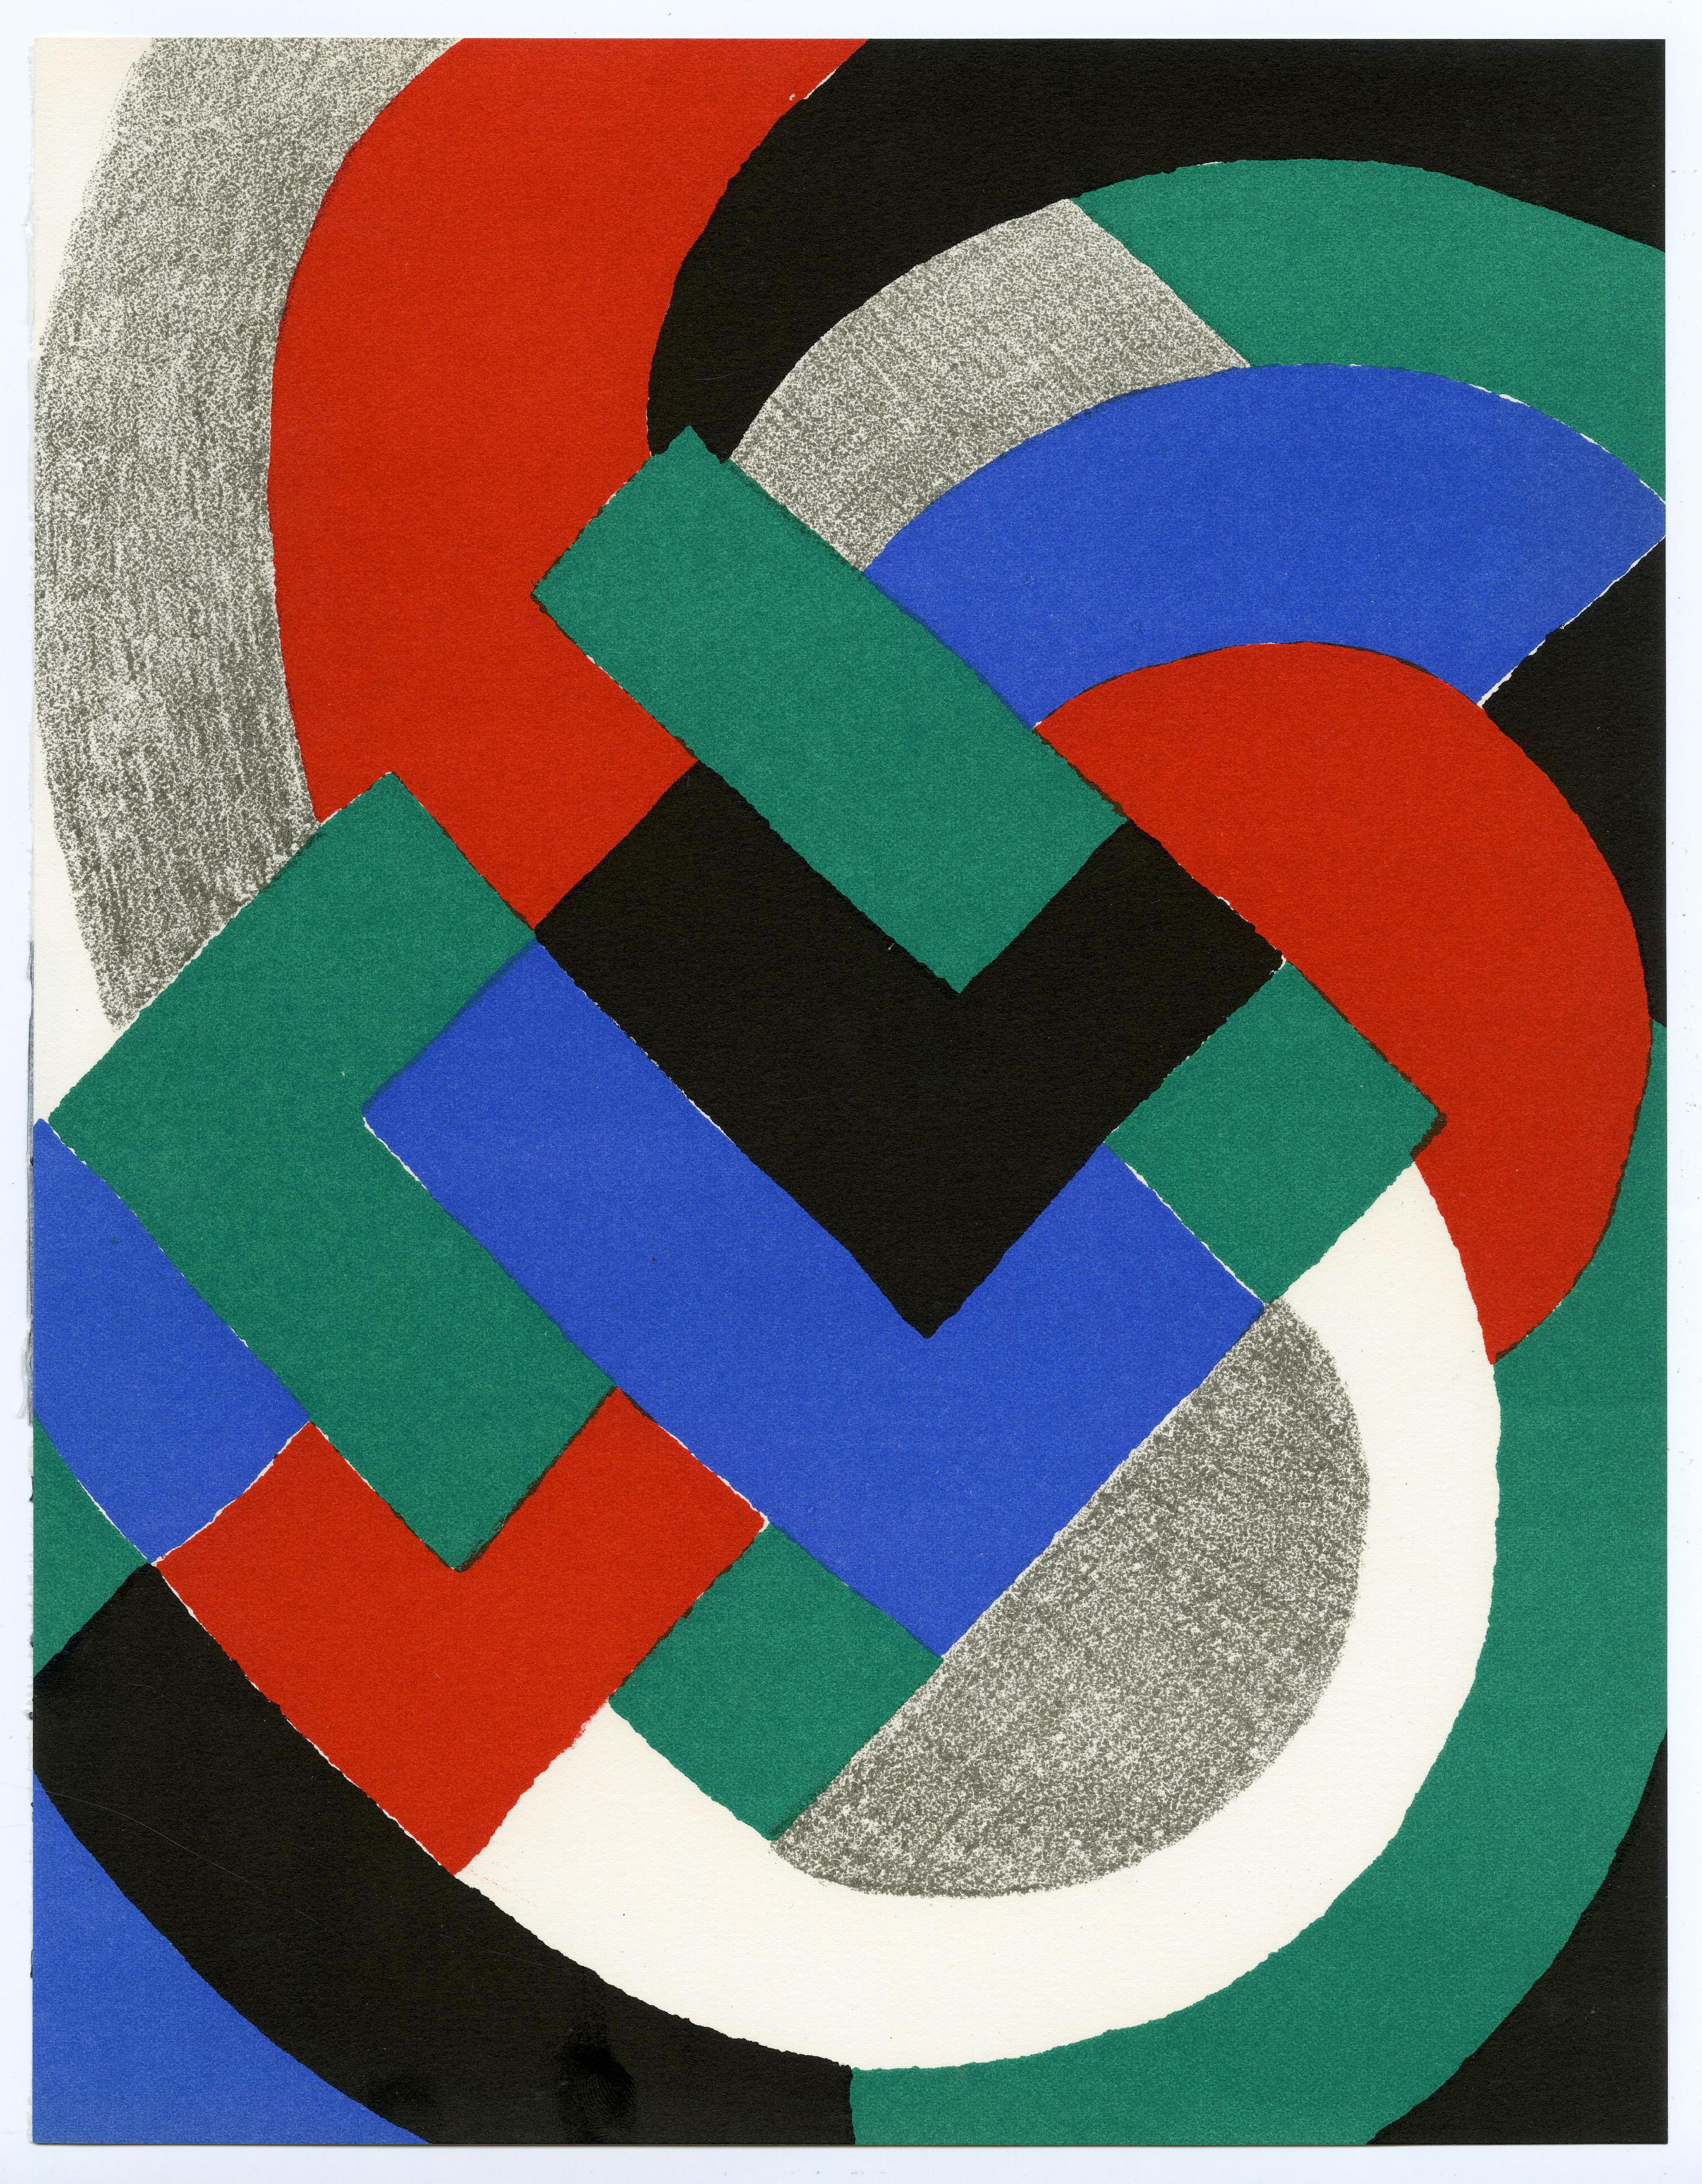 Sonia Delaunay Abstract Print - Composition pour XXe Siècle